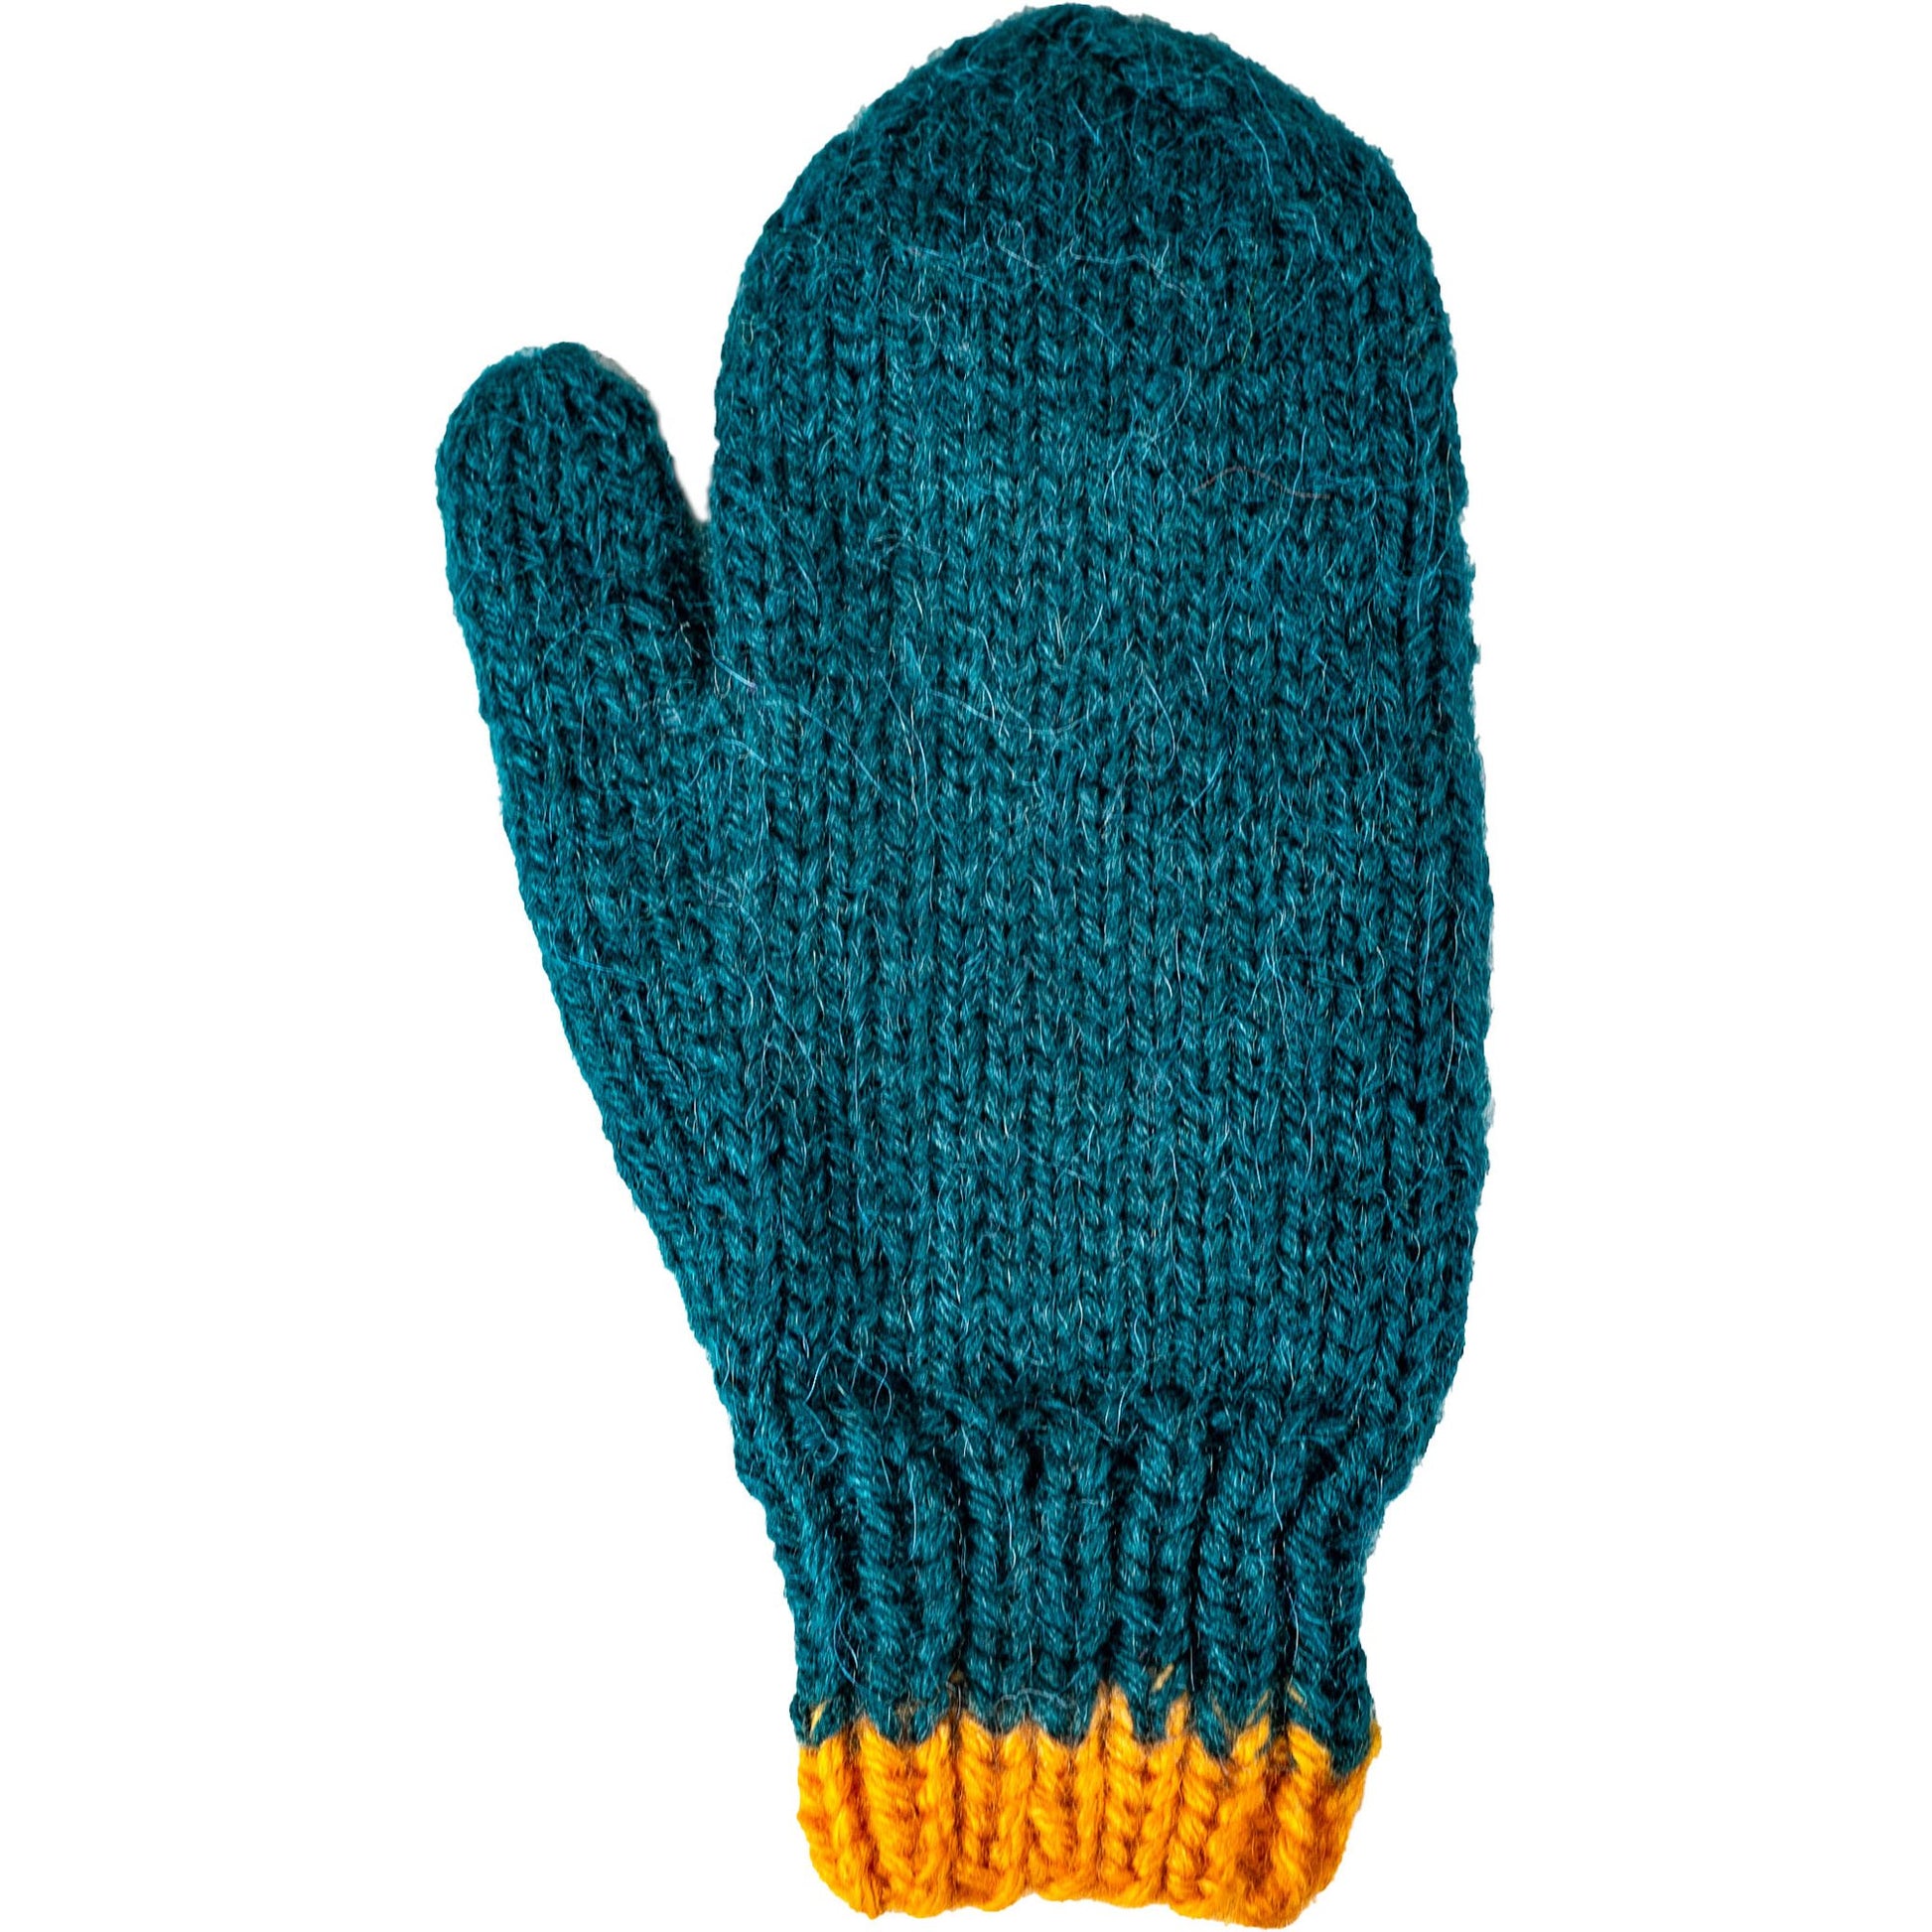 Cable Knit Mittens in Blue and Yellow